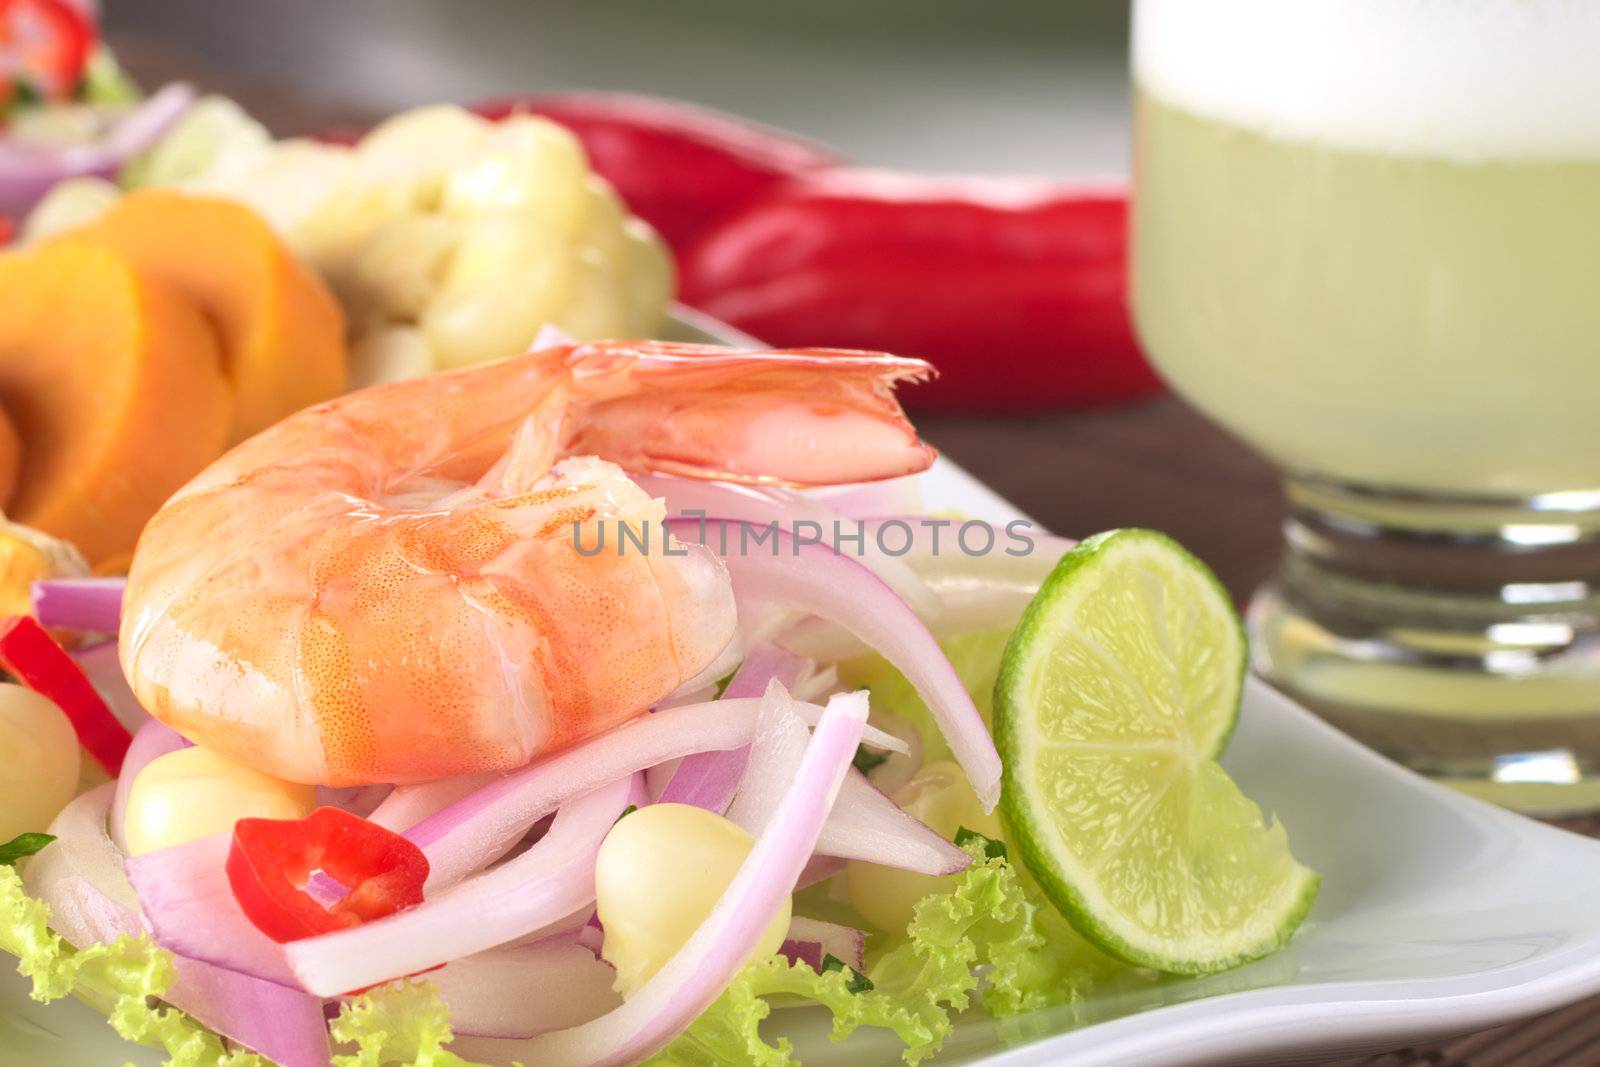 Peruvian Prawn Ceviche: King prawn on red onions and lettuce with corn grains, lime slices and sweet potato in the back and the Peruvian cocktail called Pisco Sour on the side (Selective Focus, Focus on the front of the prawn)  